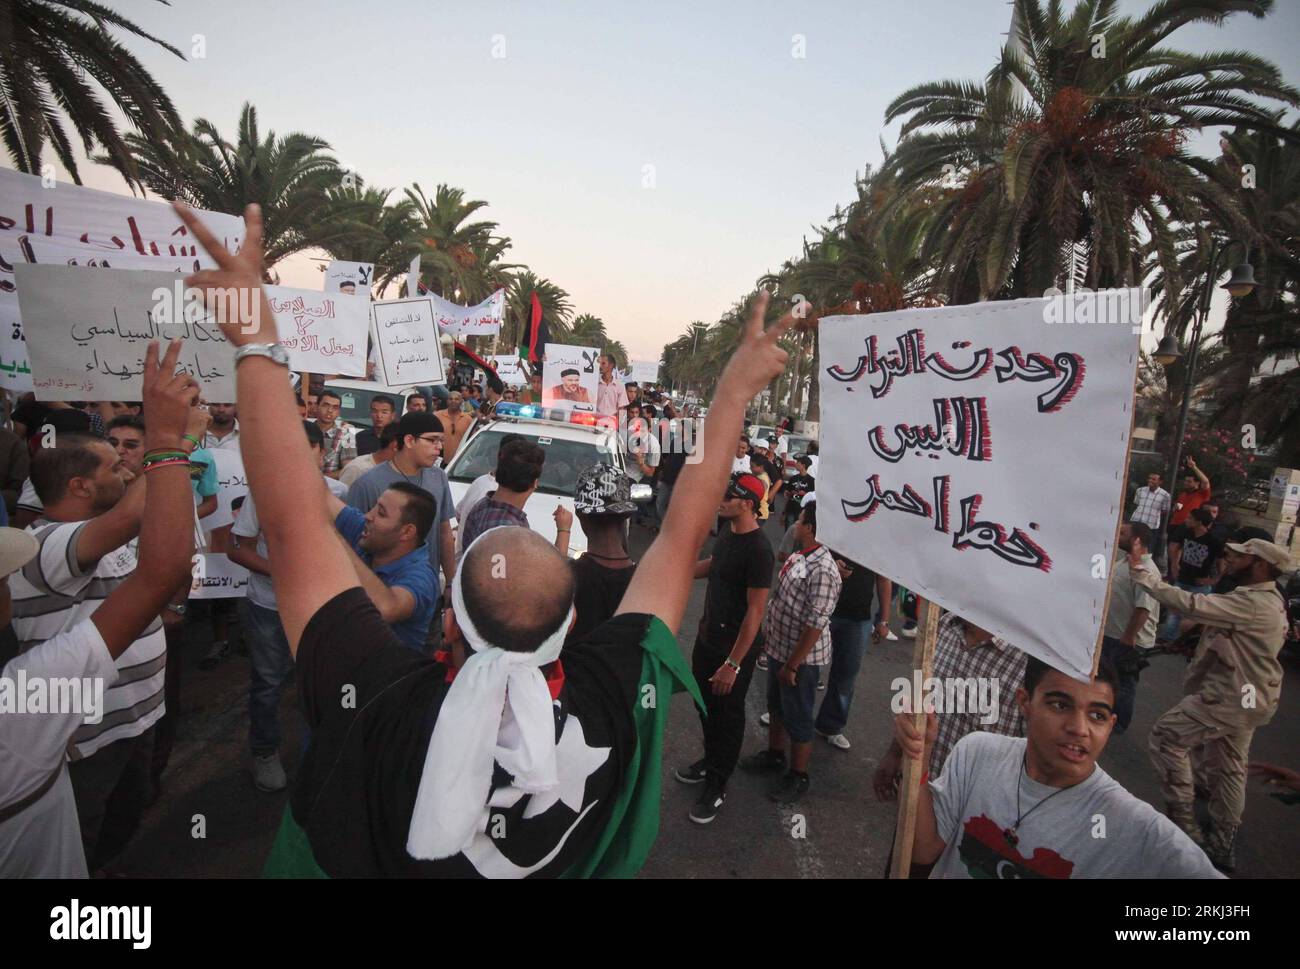 Bildnummer: 55972479  Datum: 14.09.2011  Copyright: imago/Xinhua (110914) -- TRIPOLI, Sept. 14, 2011 (Xinhua) -- Hundreds of Libyans demonstrate against religious and political intolerance during a massive march in Tripoli, Libya, Sept. 14, 2011. Some Libyan political and religious activists like Dr. AliAlSalabi had made statements against the NTC in several occasions which provoked the majority of Libyan citizens to protest against their attitude. (Xinhua/Amru Salahuddien) (wjd) LIBYA-DEMONSTRATION-AGAINST INTOLERANCE PUBLICATIONxNOTxINxCHN Gesellschaft Politik Demo Protest Religion Intoleran Stock Photo